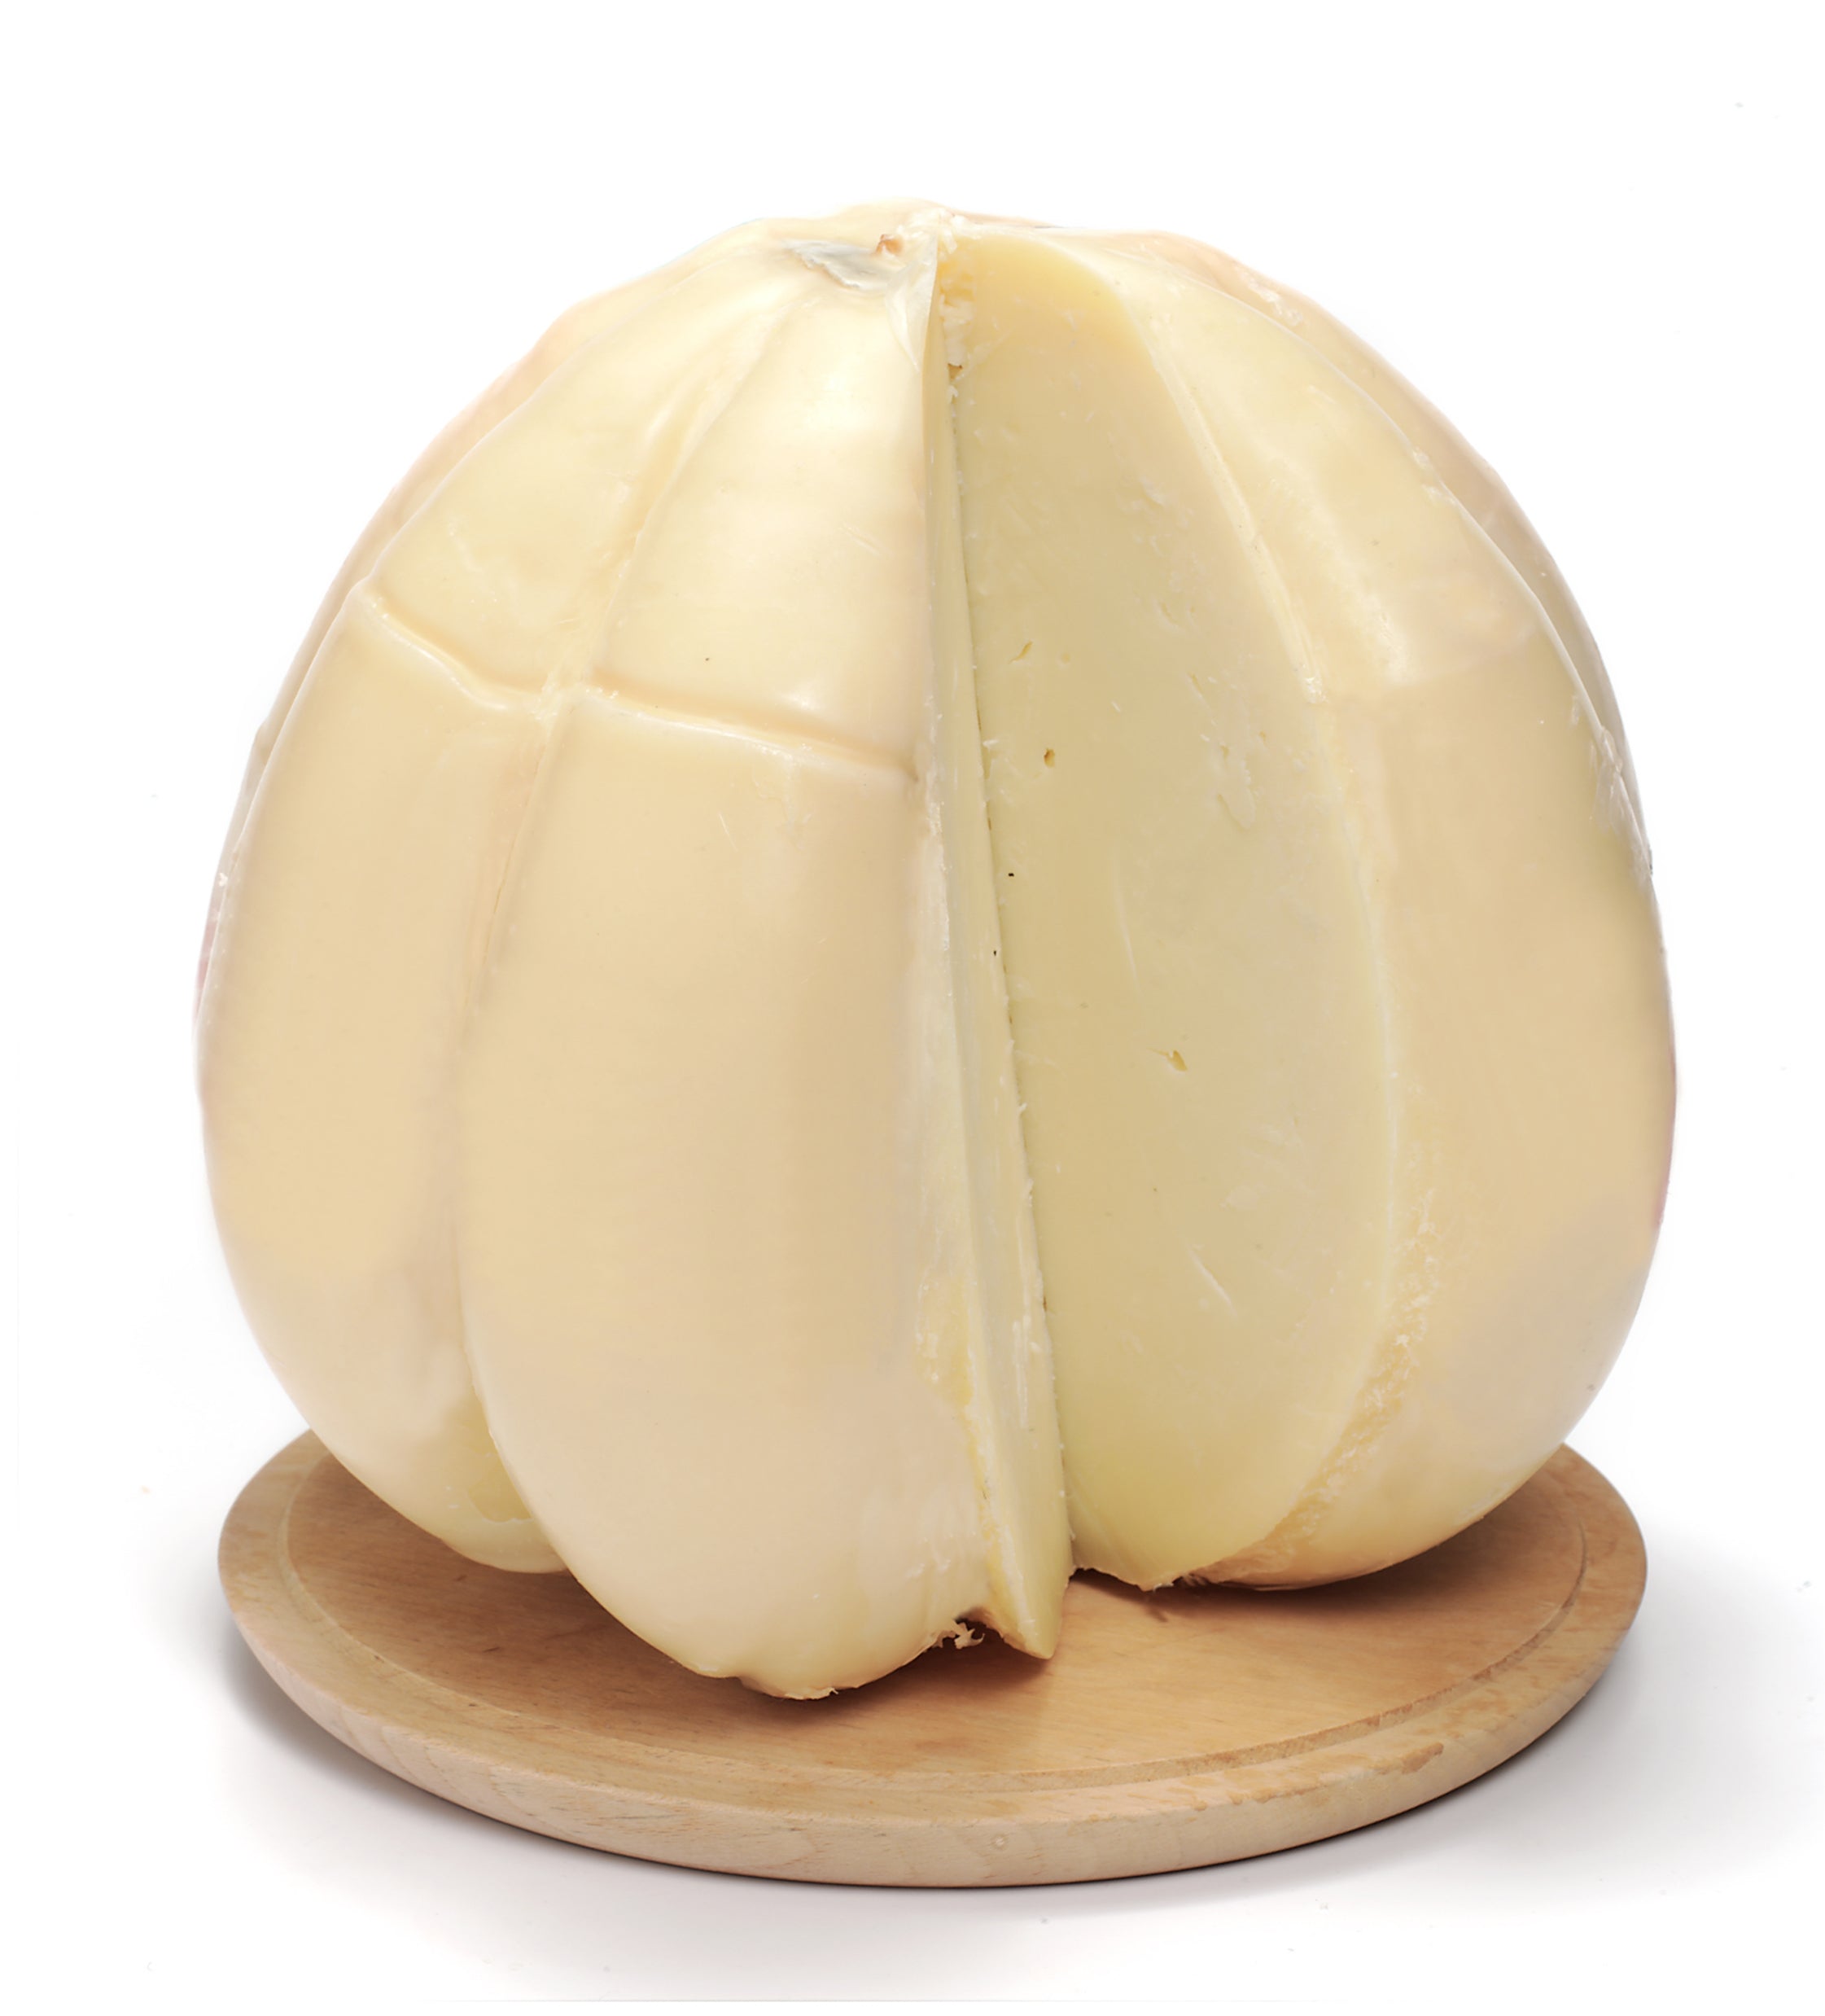 Cheese - Provolone Aged 8 oz